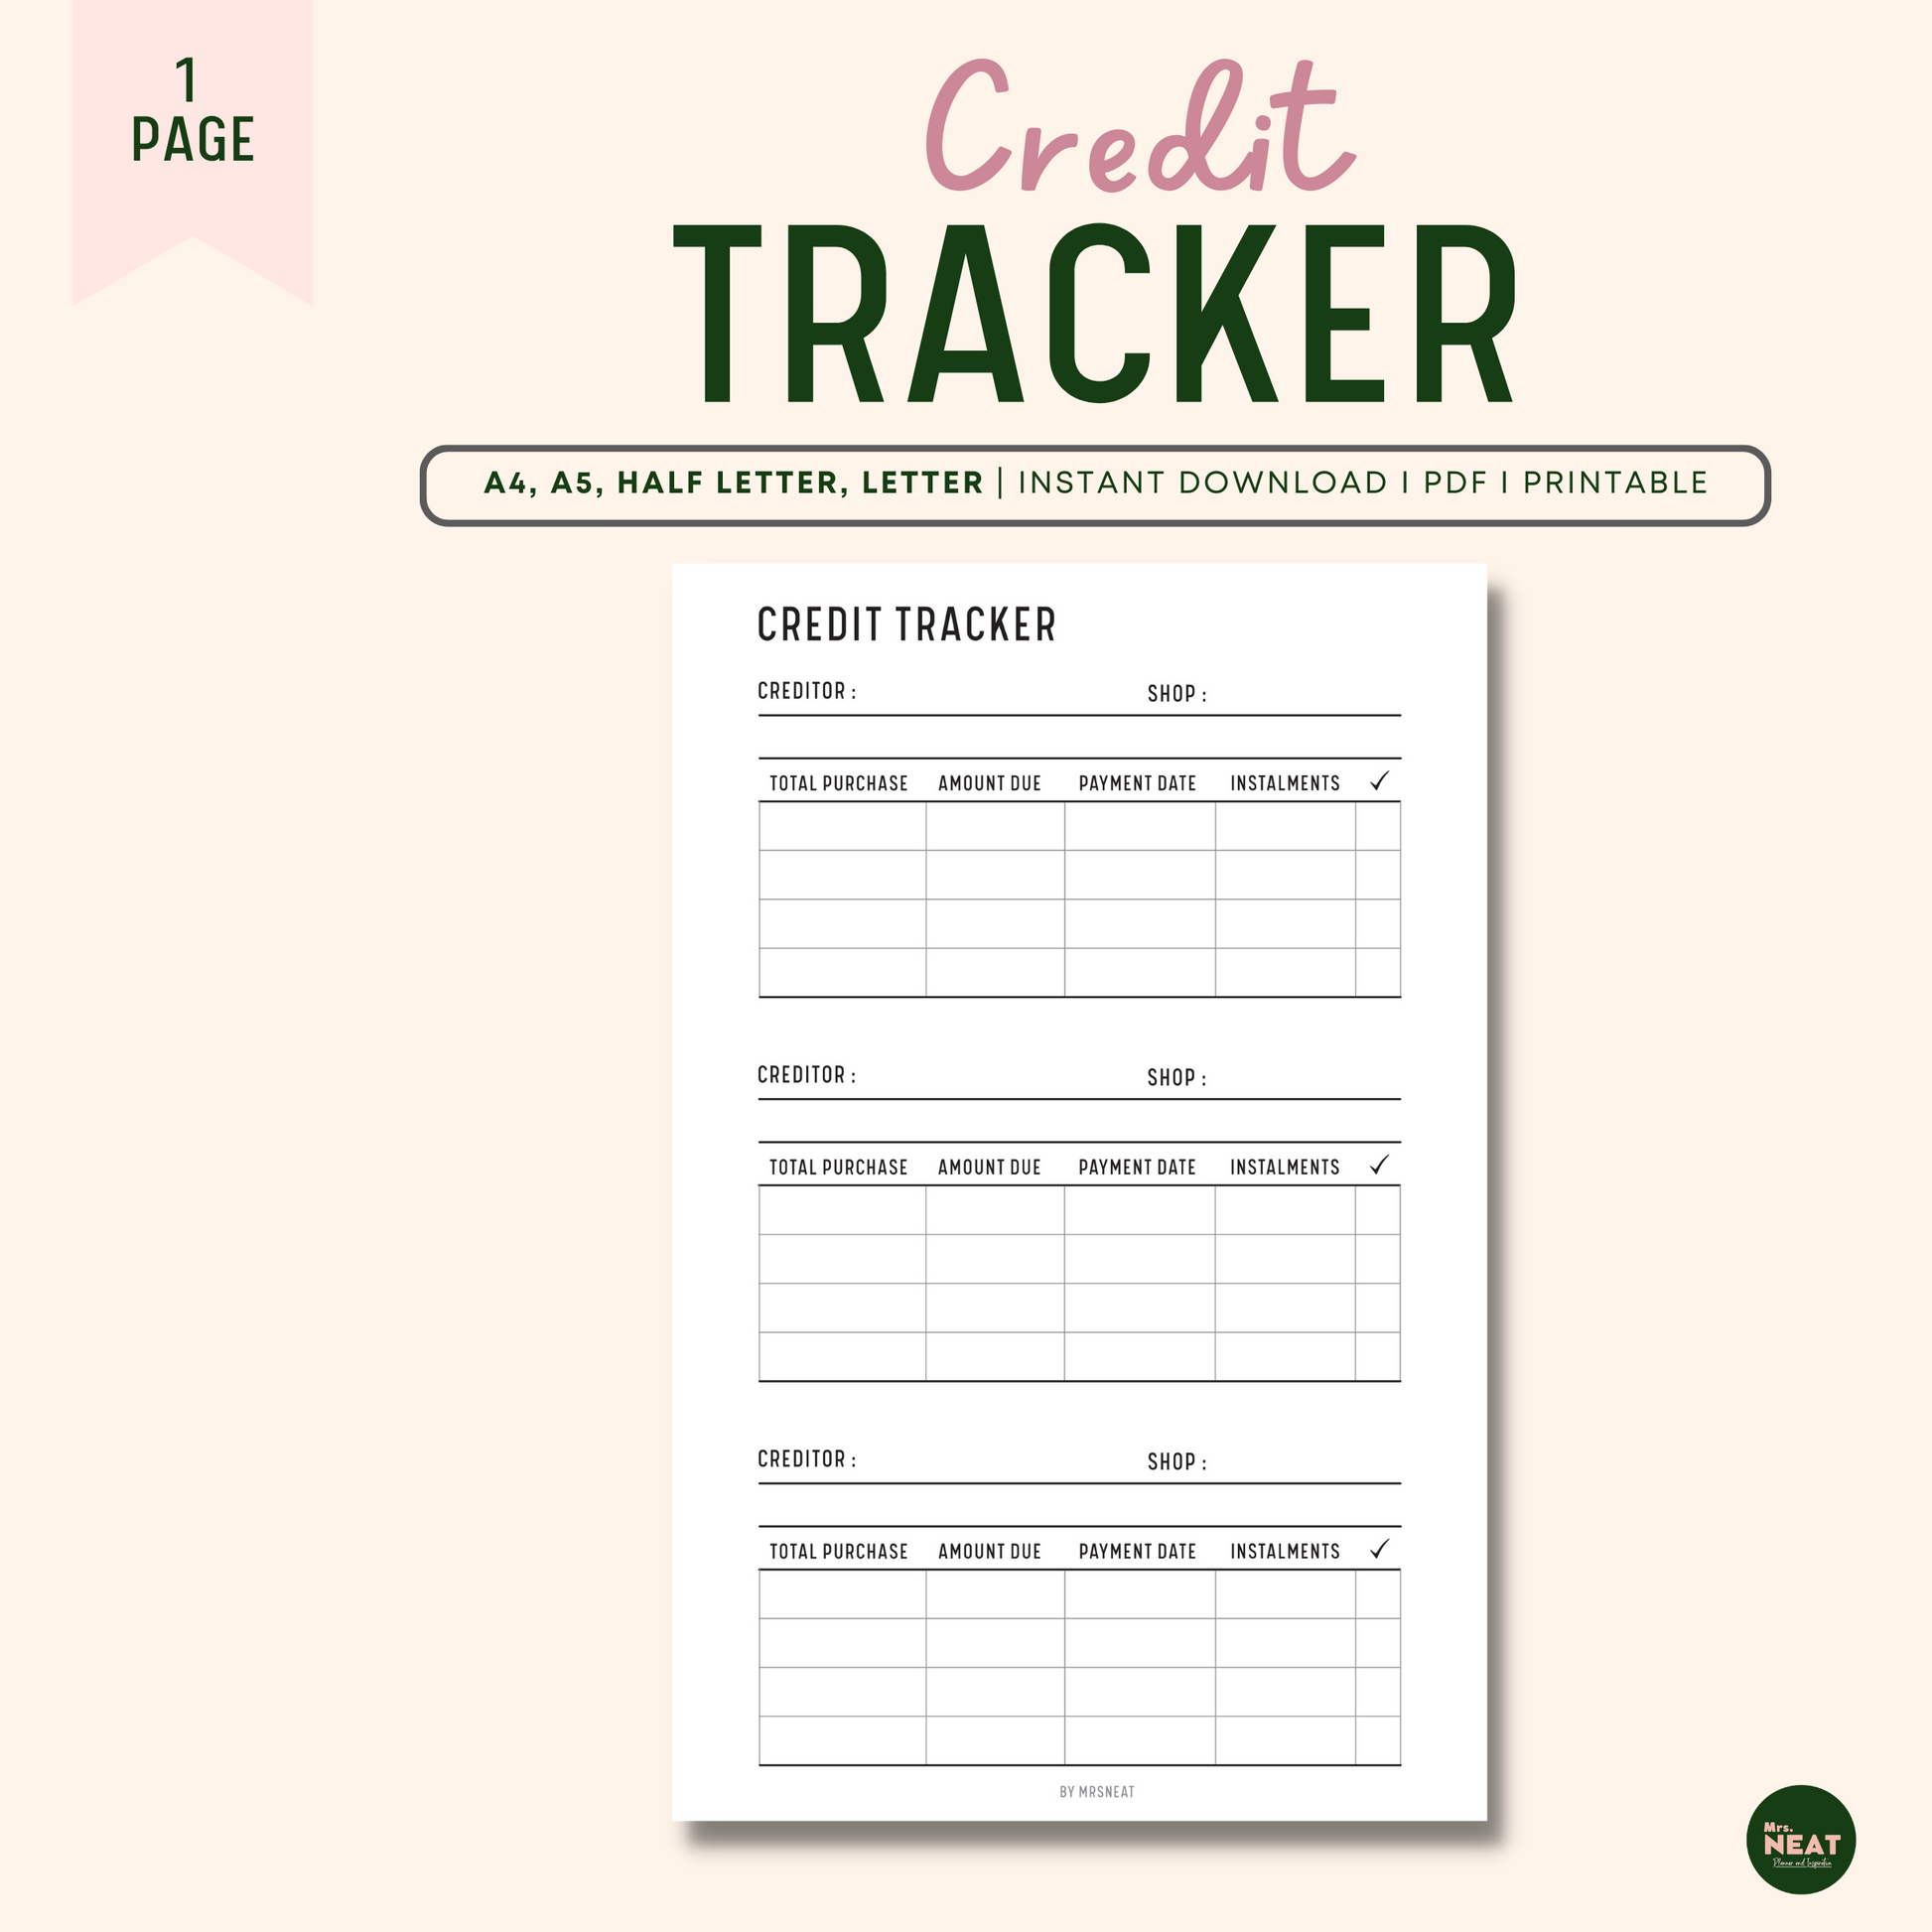 Credit Tracker Planner with room for creditor, shop, total purchase, Amount, repayment and installment